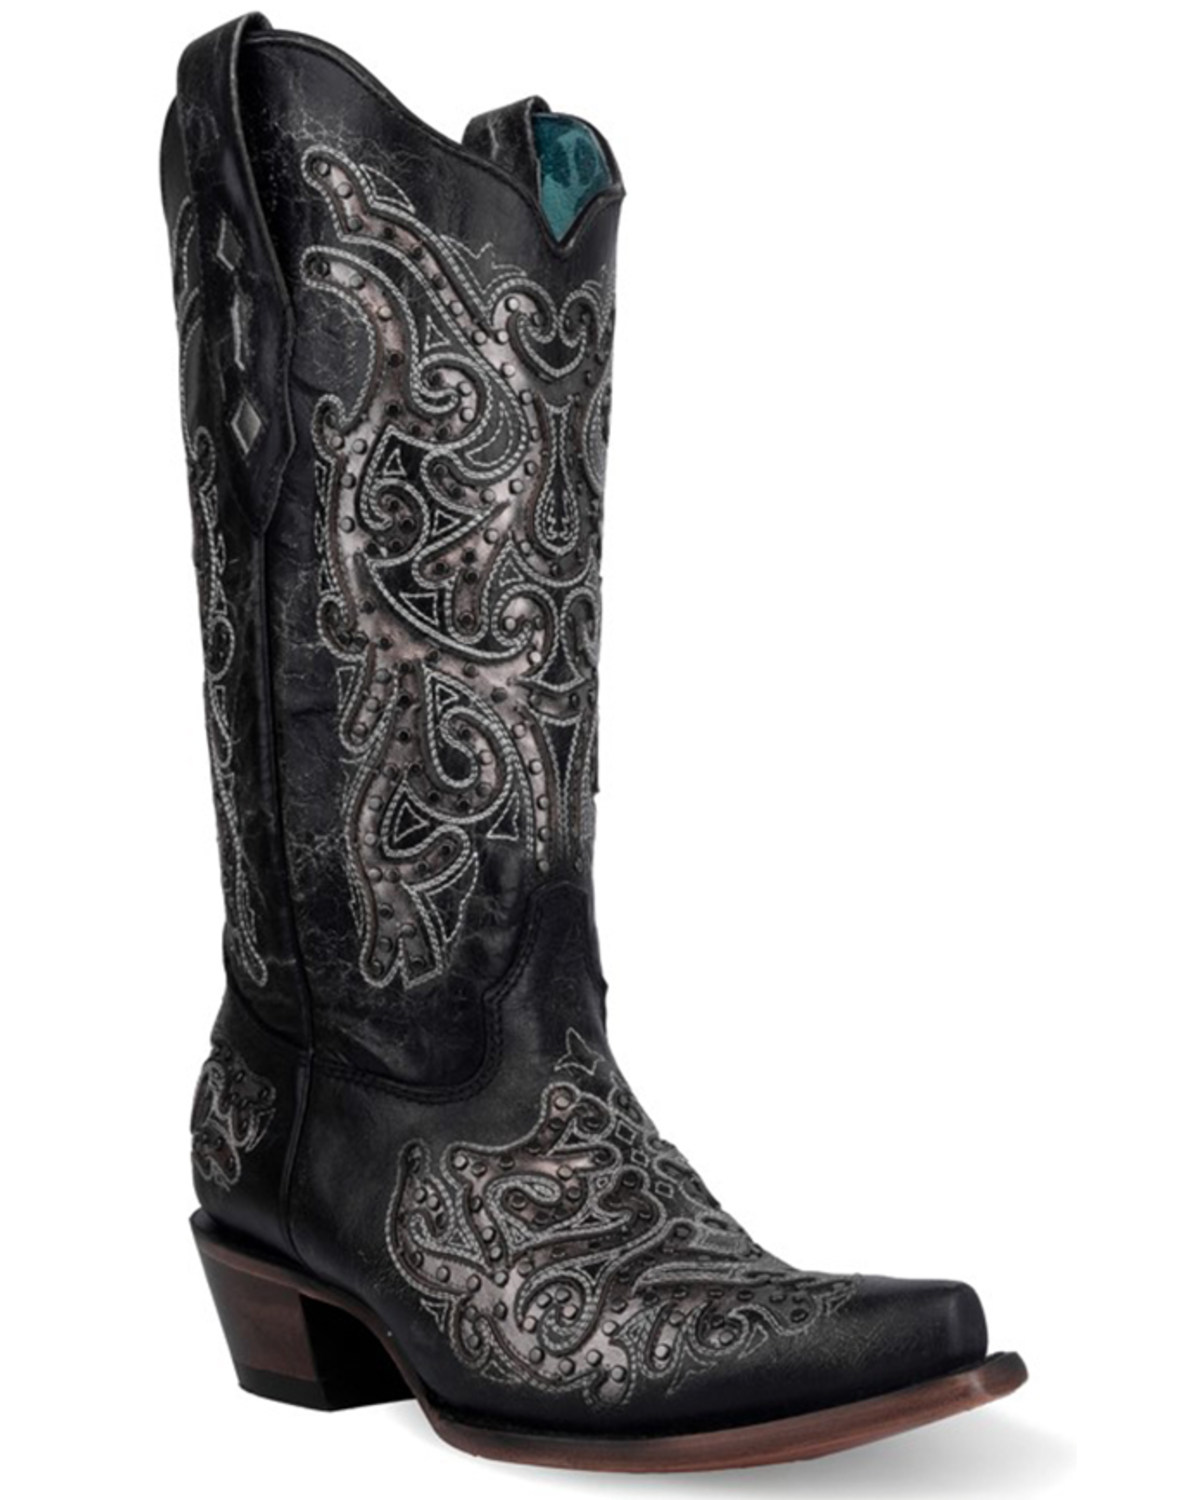 Corral Women's Studded Inlay Western Boots - Snip Toe